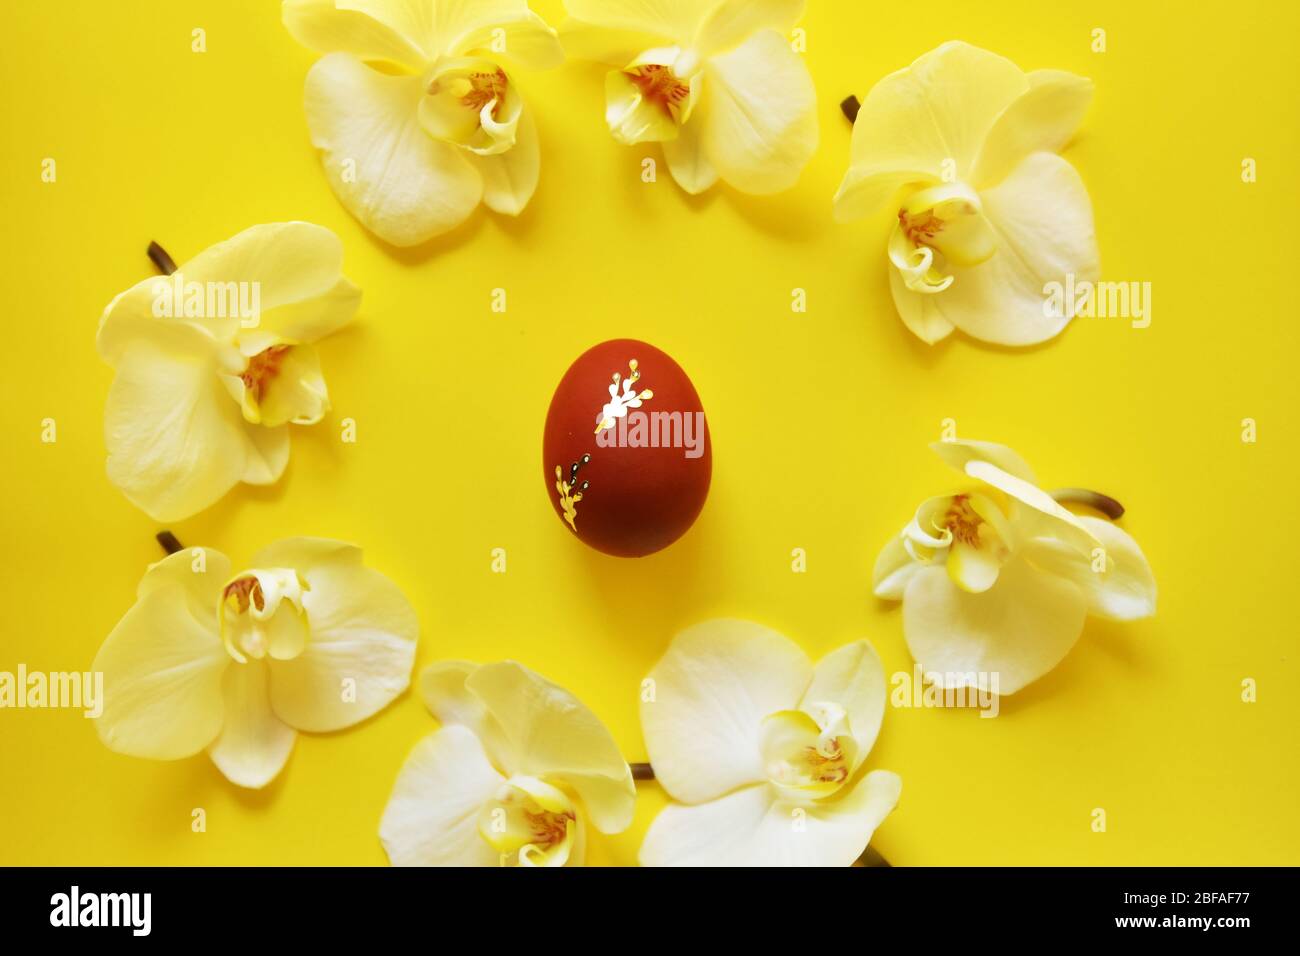 Easter red egg surrounded by orchid flowers on a yellow background. Stock Photo